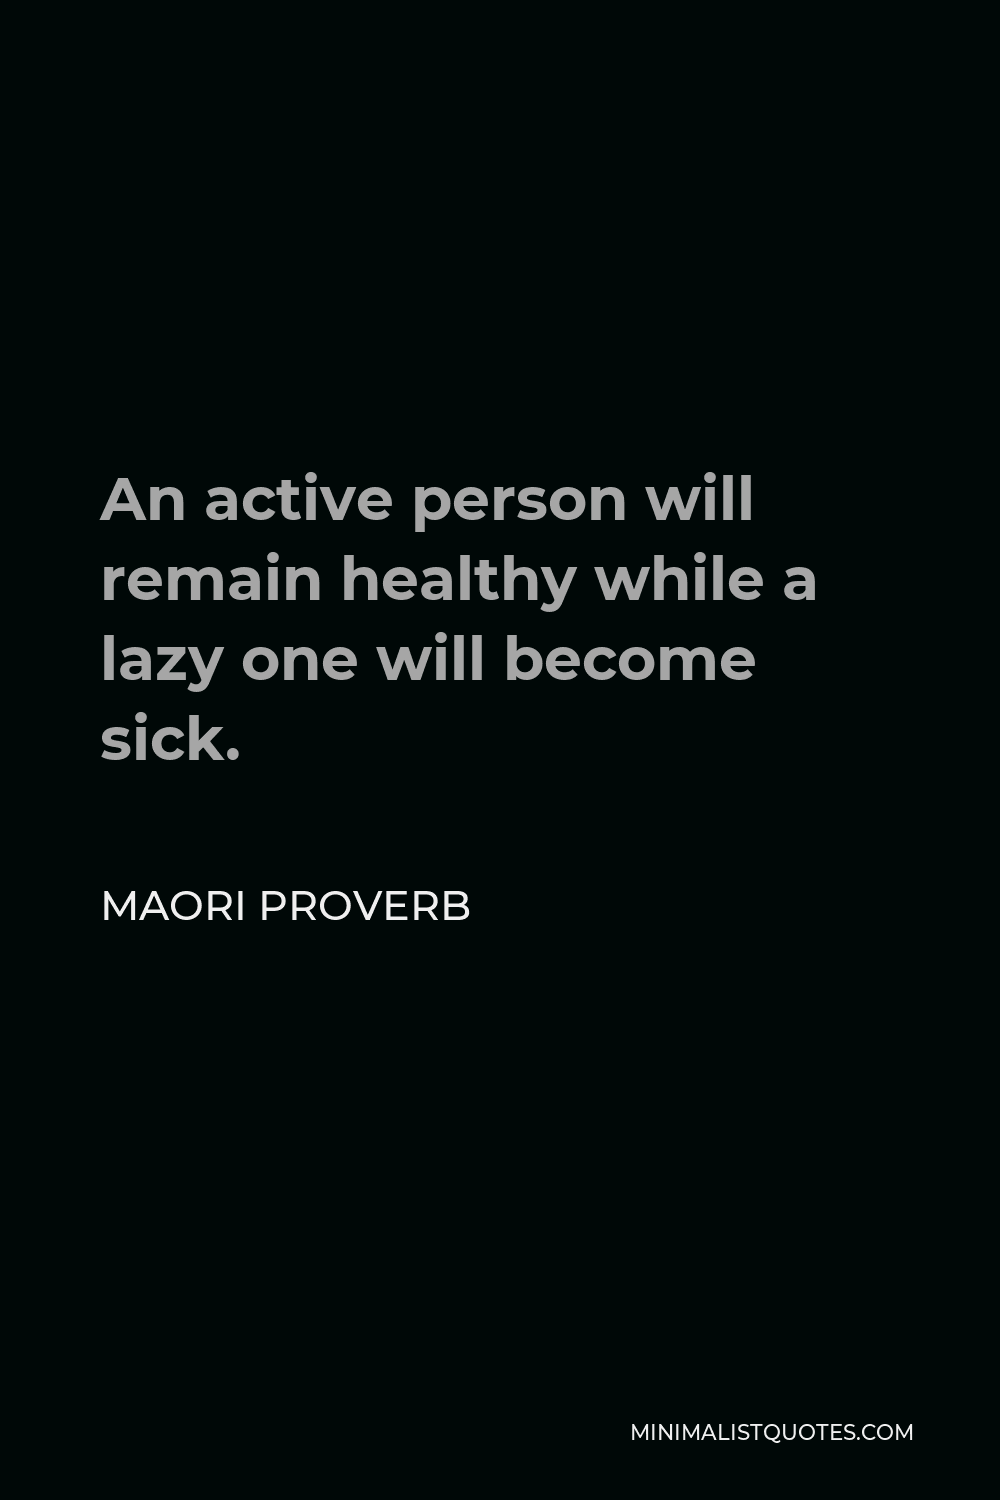 Maori Proverb Quote - An active person will remain healthy while a lazy one will become sick.